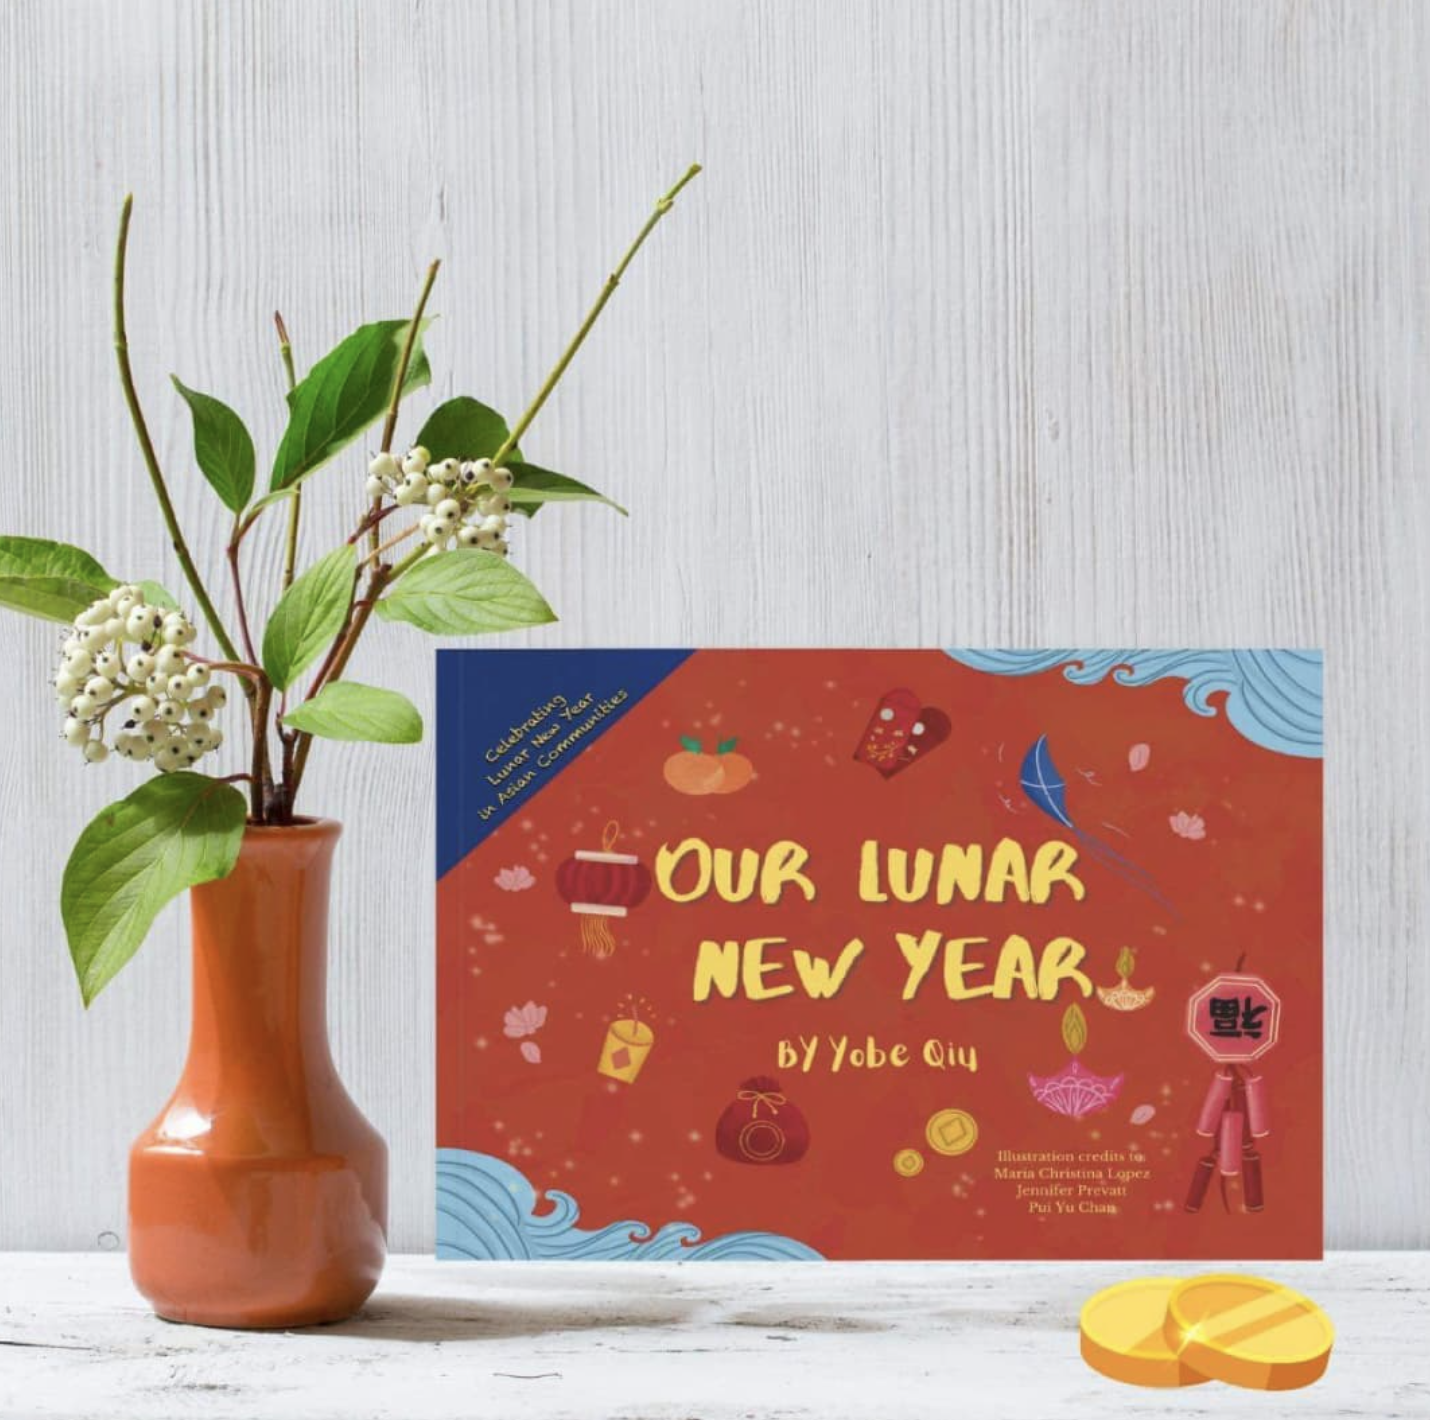 Our Lunar New Year Book on white background next to potted plant